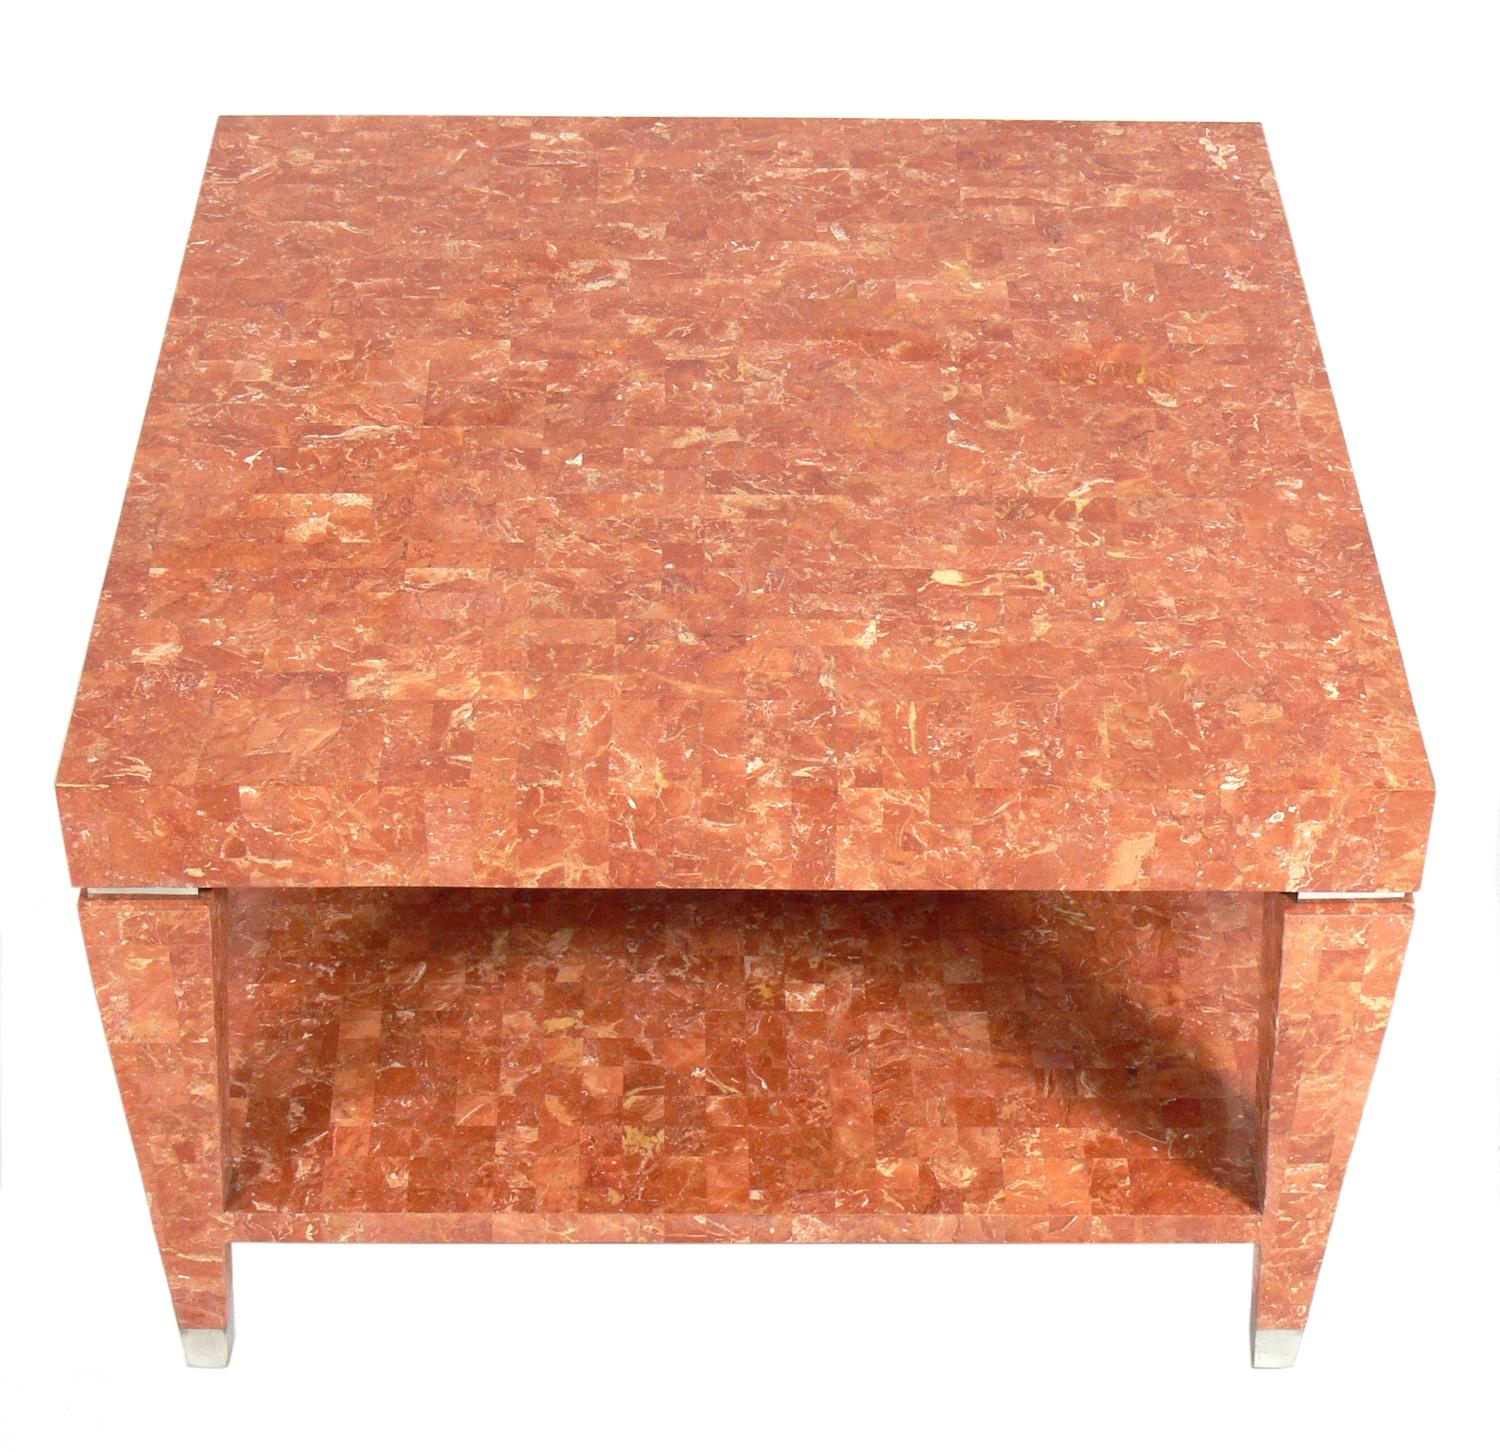 Tessellated marble table, designed by Maitland-Smith, American, circa 1980s. It is a versatile size and can be used as a coffee table, side table, or nightstand. Beautiful coral color tessellated marble with nickel-plated metal details.